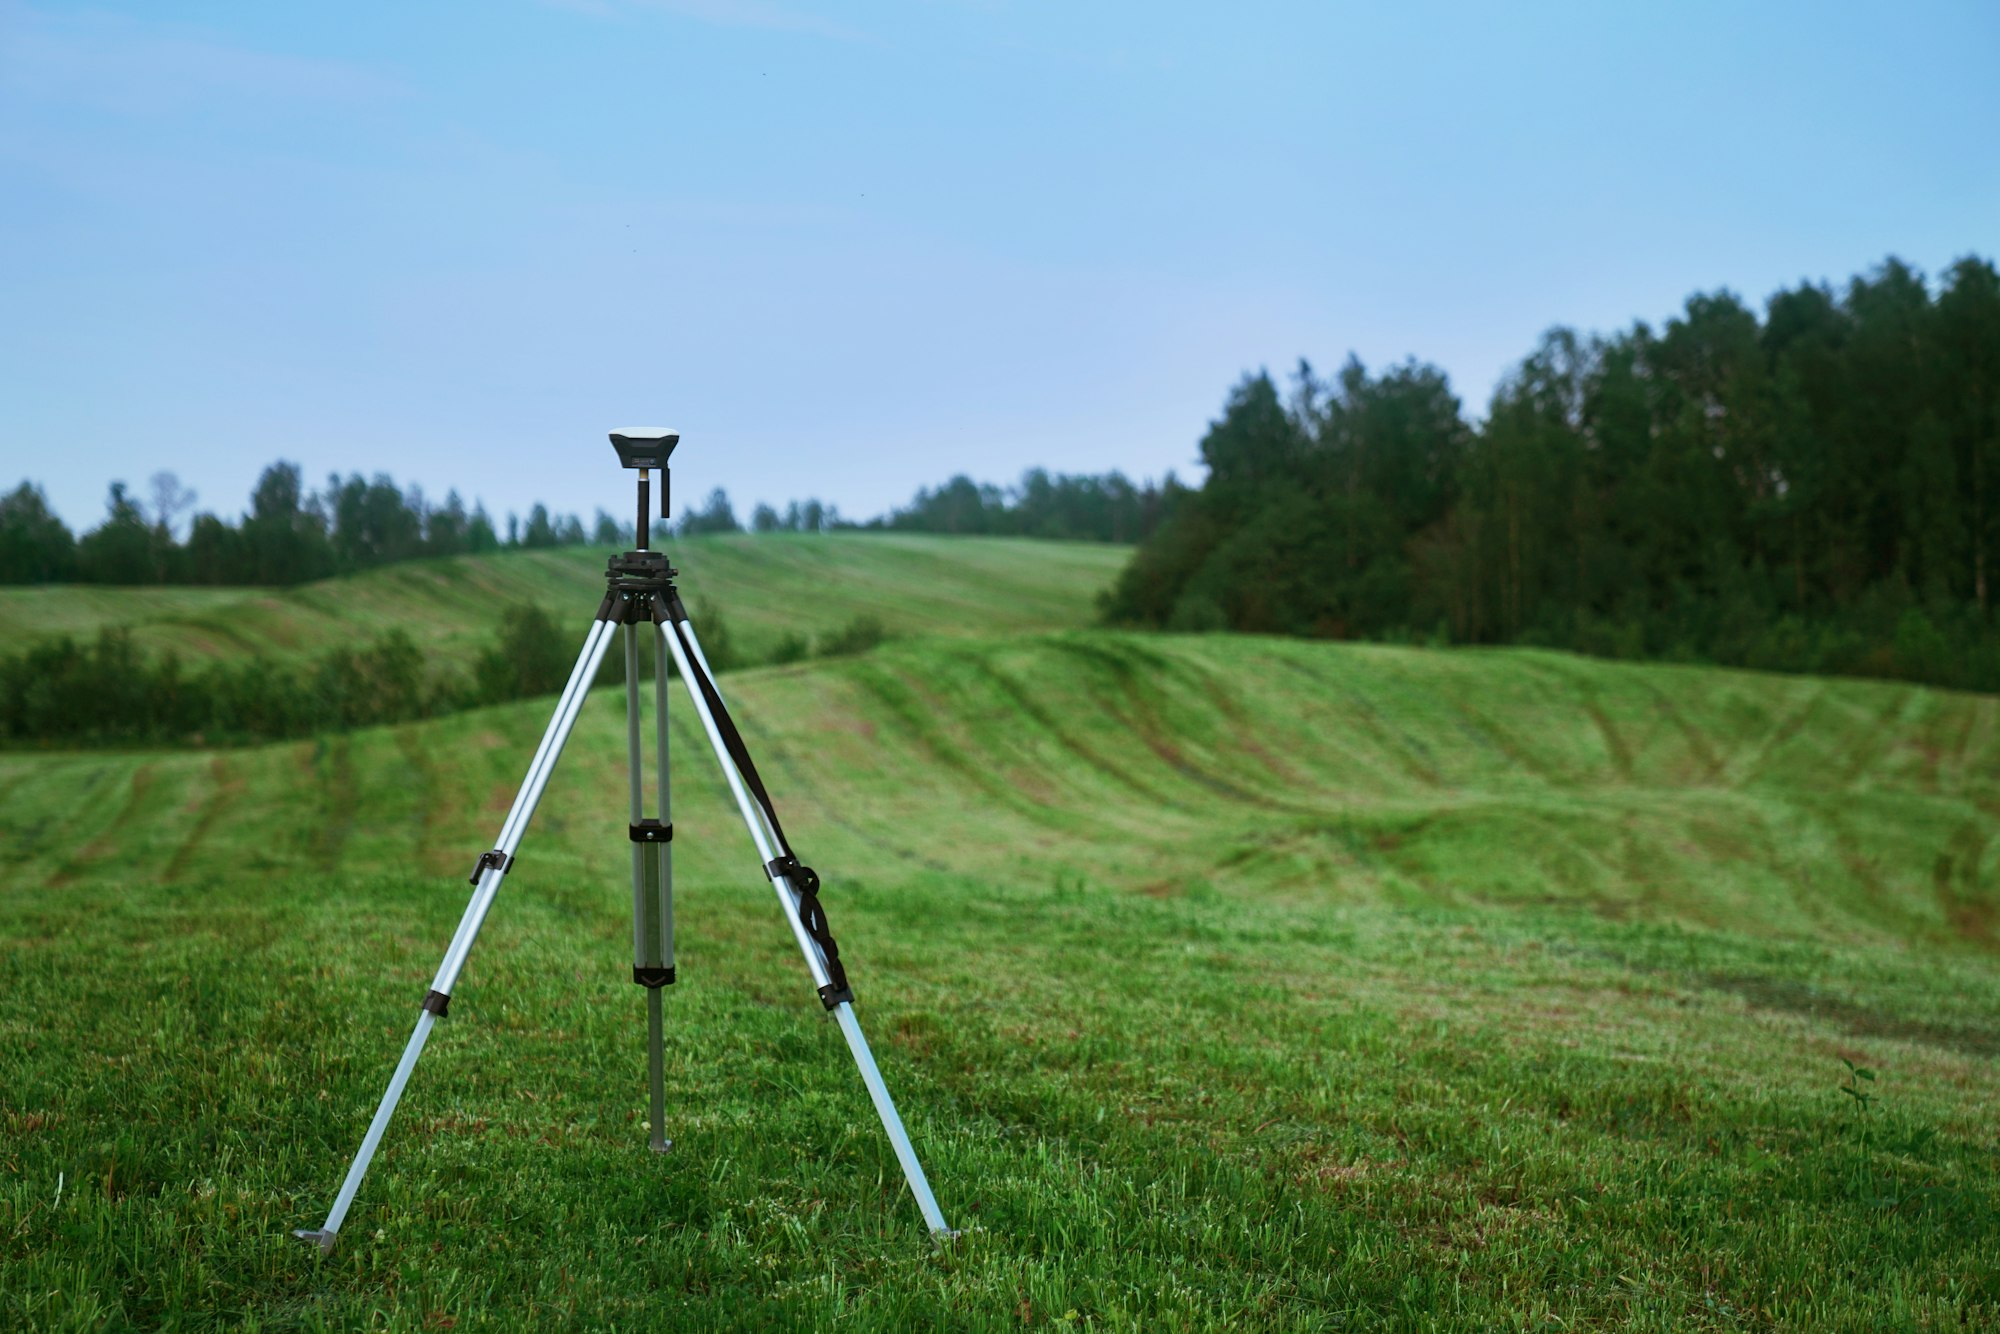 A surveyors device on a tripod in a lush green field of rolling hills, trees in the background, at dusk.